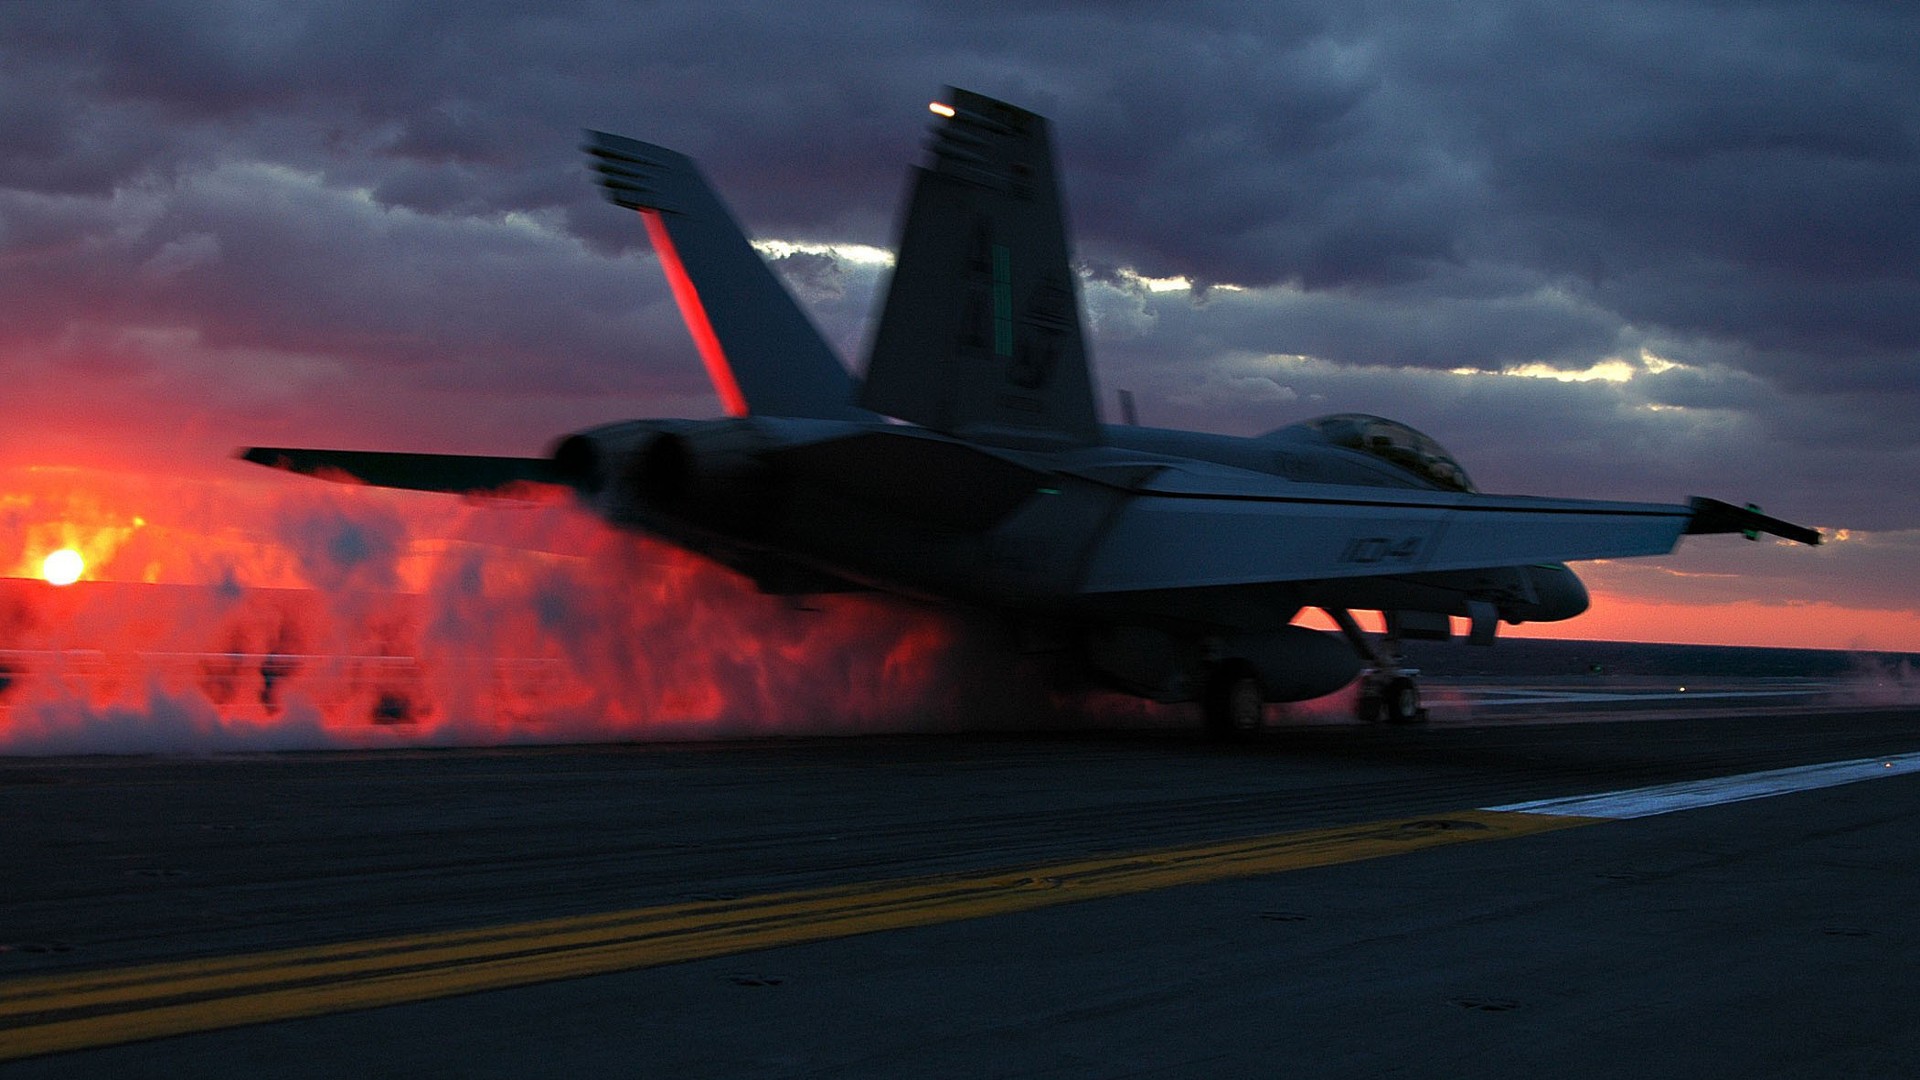 General 1920x1080 military navy United States Navy McDonnell Douglas F/A-18 Hornet aircraft military aircraft vehicle military vehicle aircraft carrier flight deck sunset 2005 (Year) USS Dwight D. Eisenhower launching jet fighter American aircraft